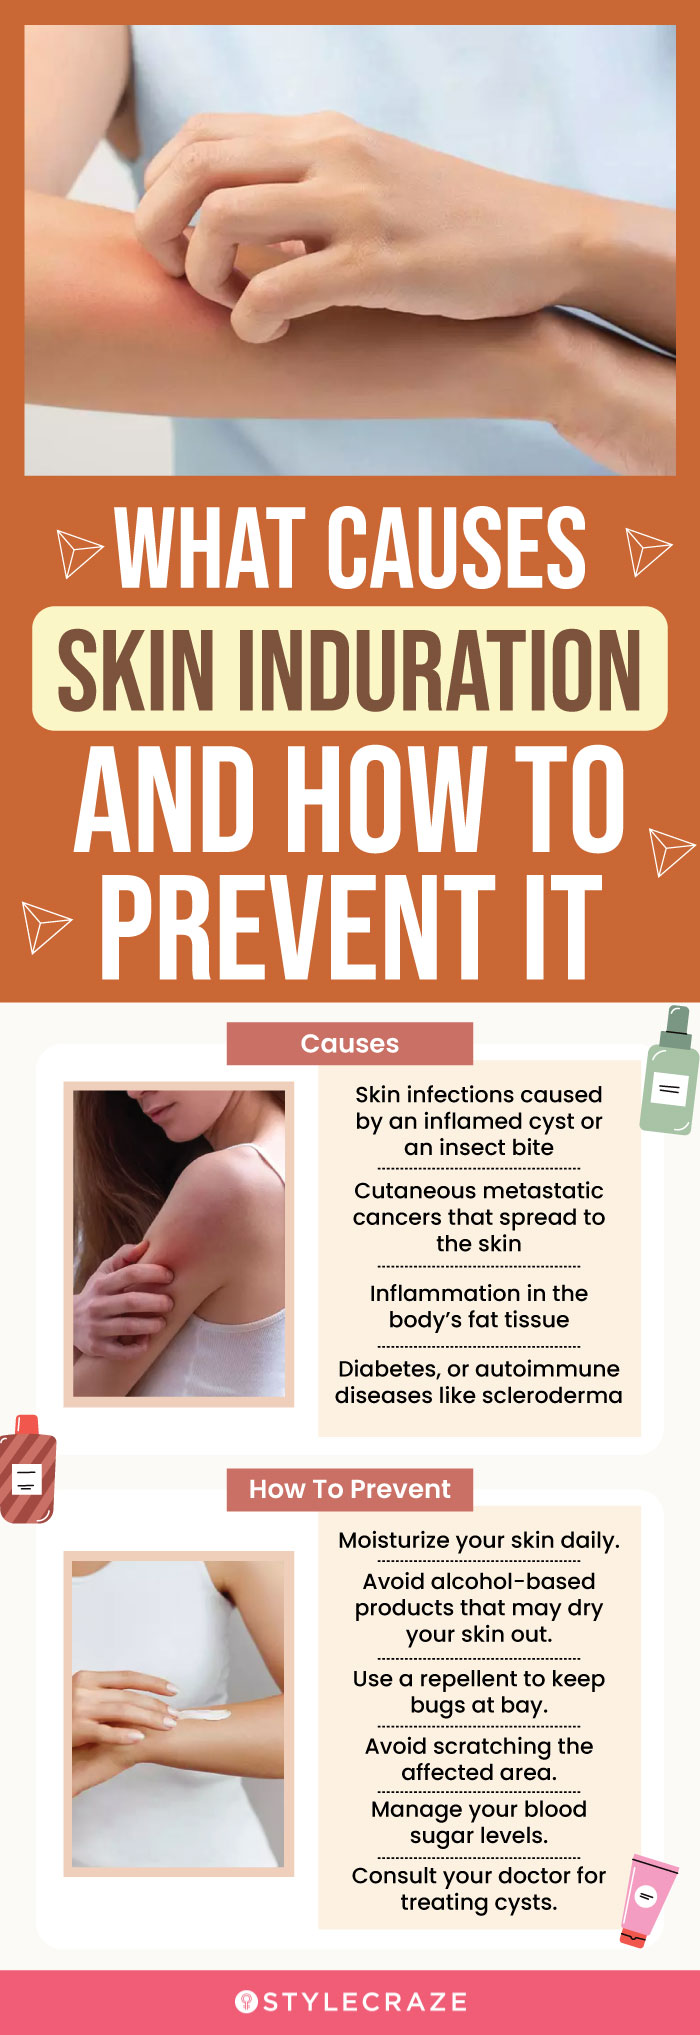 what causes skin induration and how to prevent it (infographic)